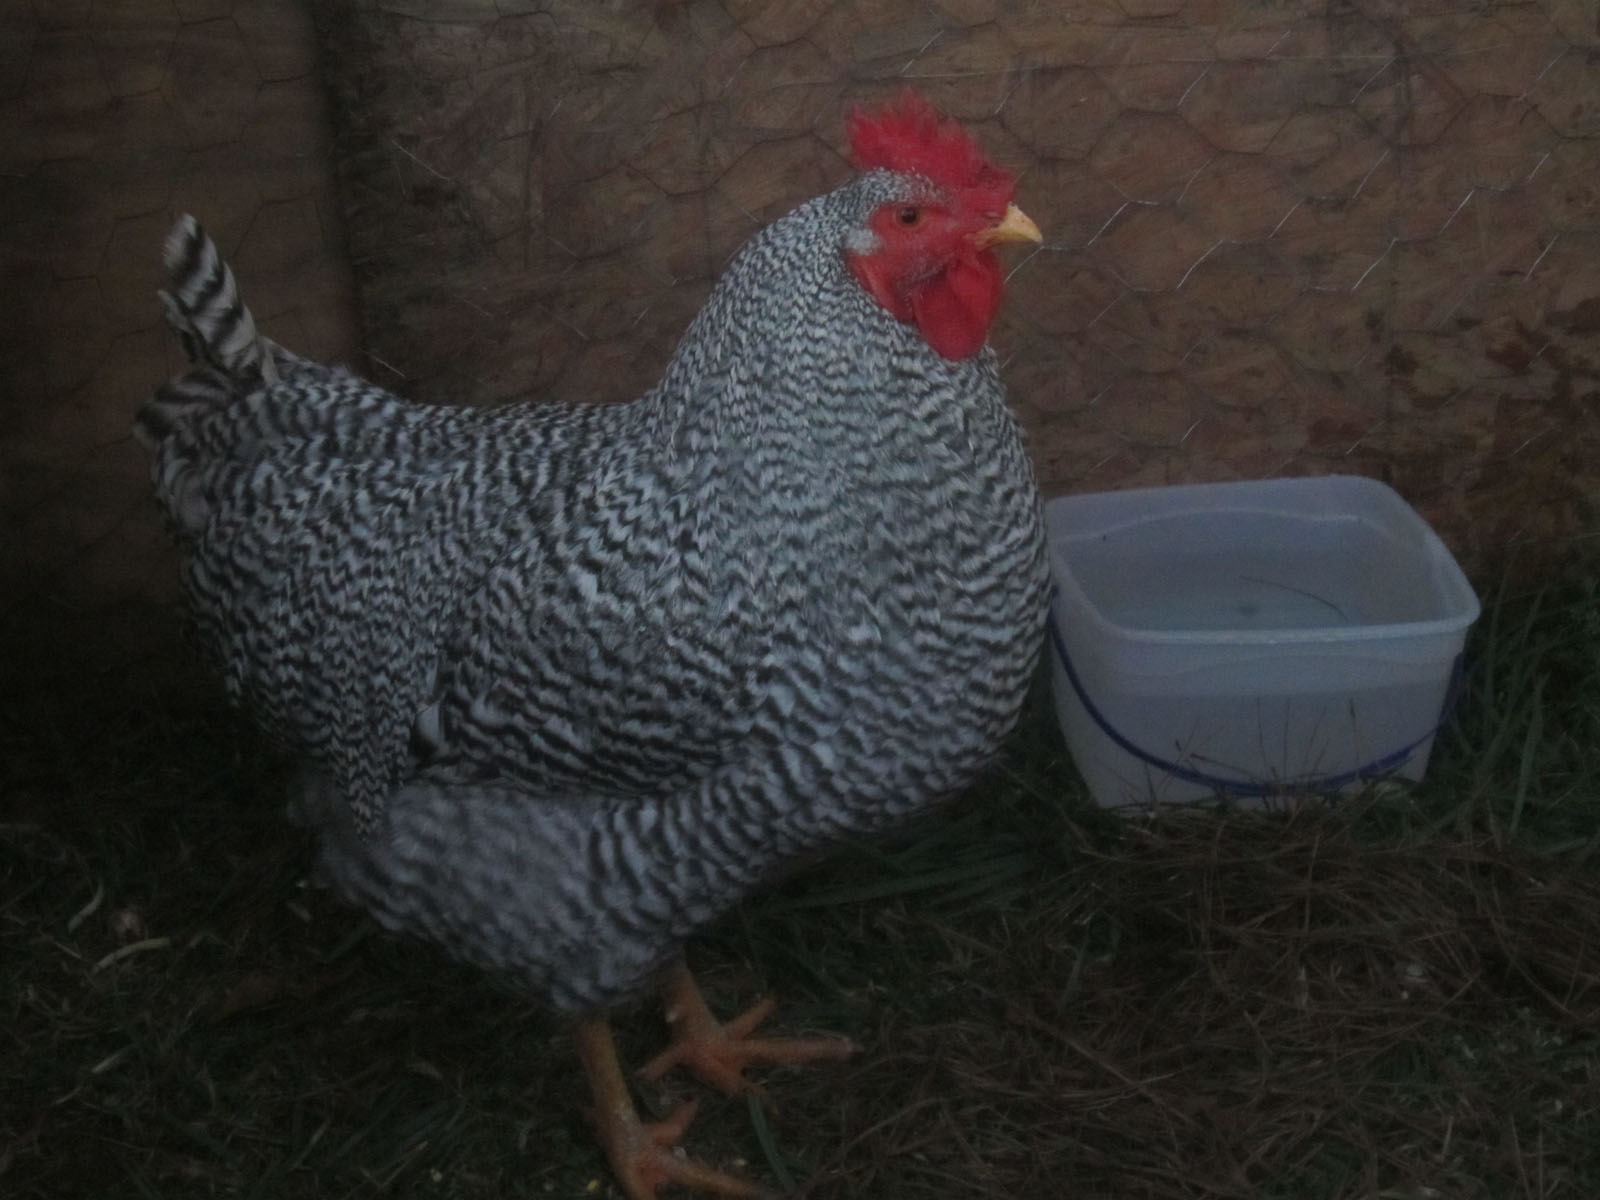 Barred Rock Rooster checking out his hens